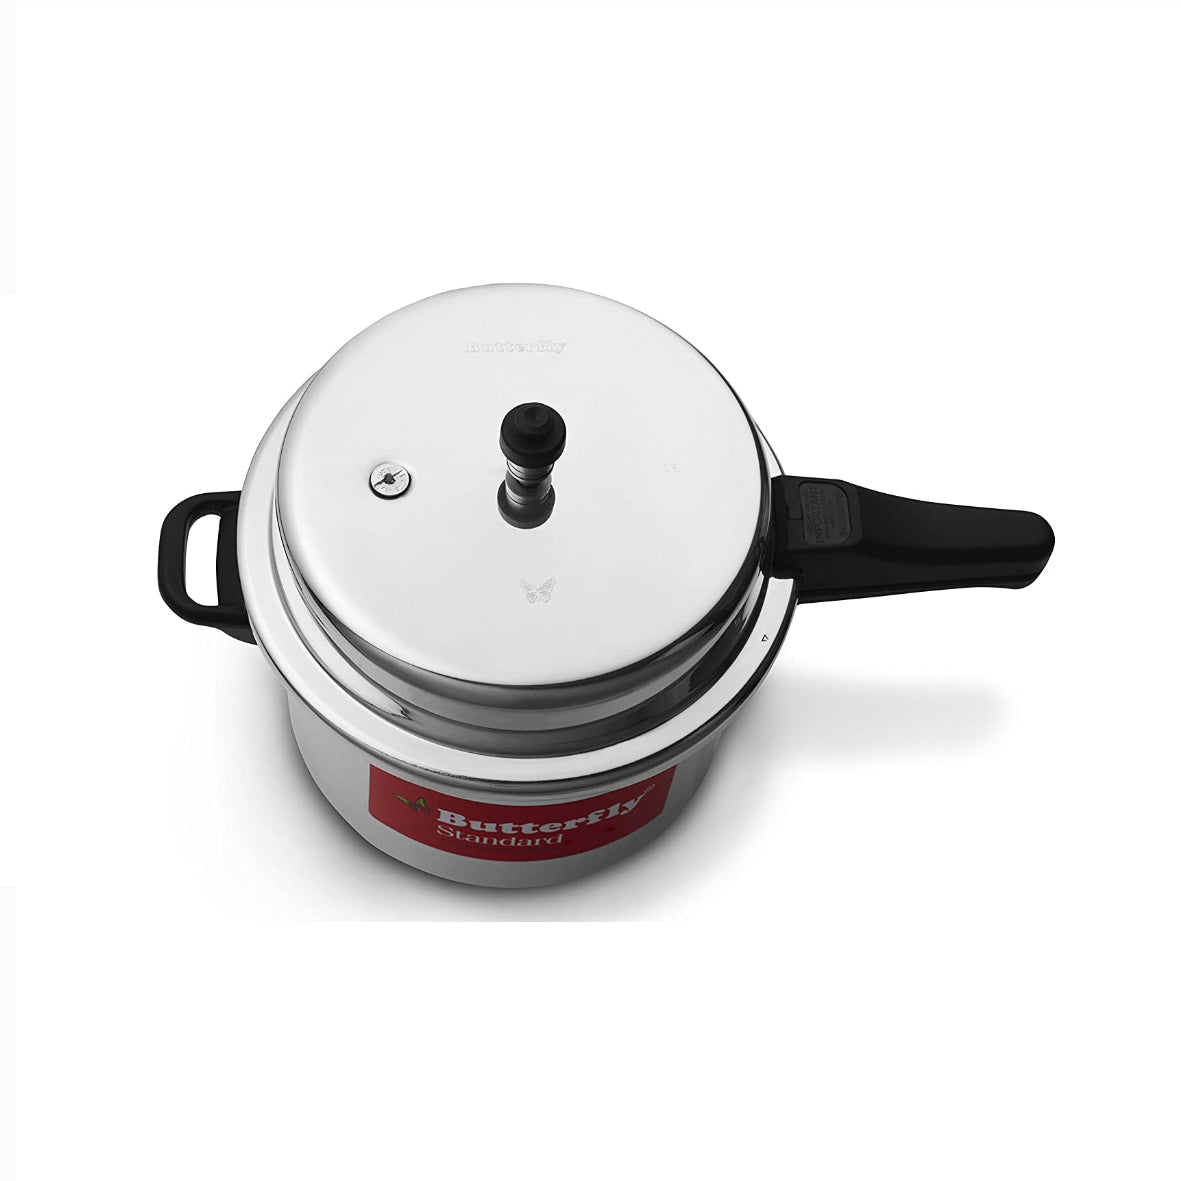 Butterfly Standard Aluminium Induction Base Outer Lid Pressure Cooker, 7.5 Litres